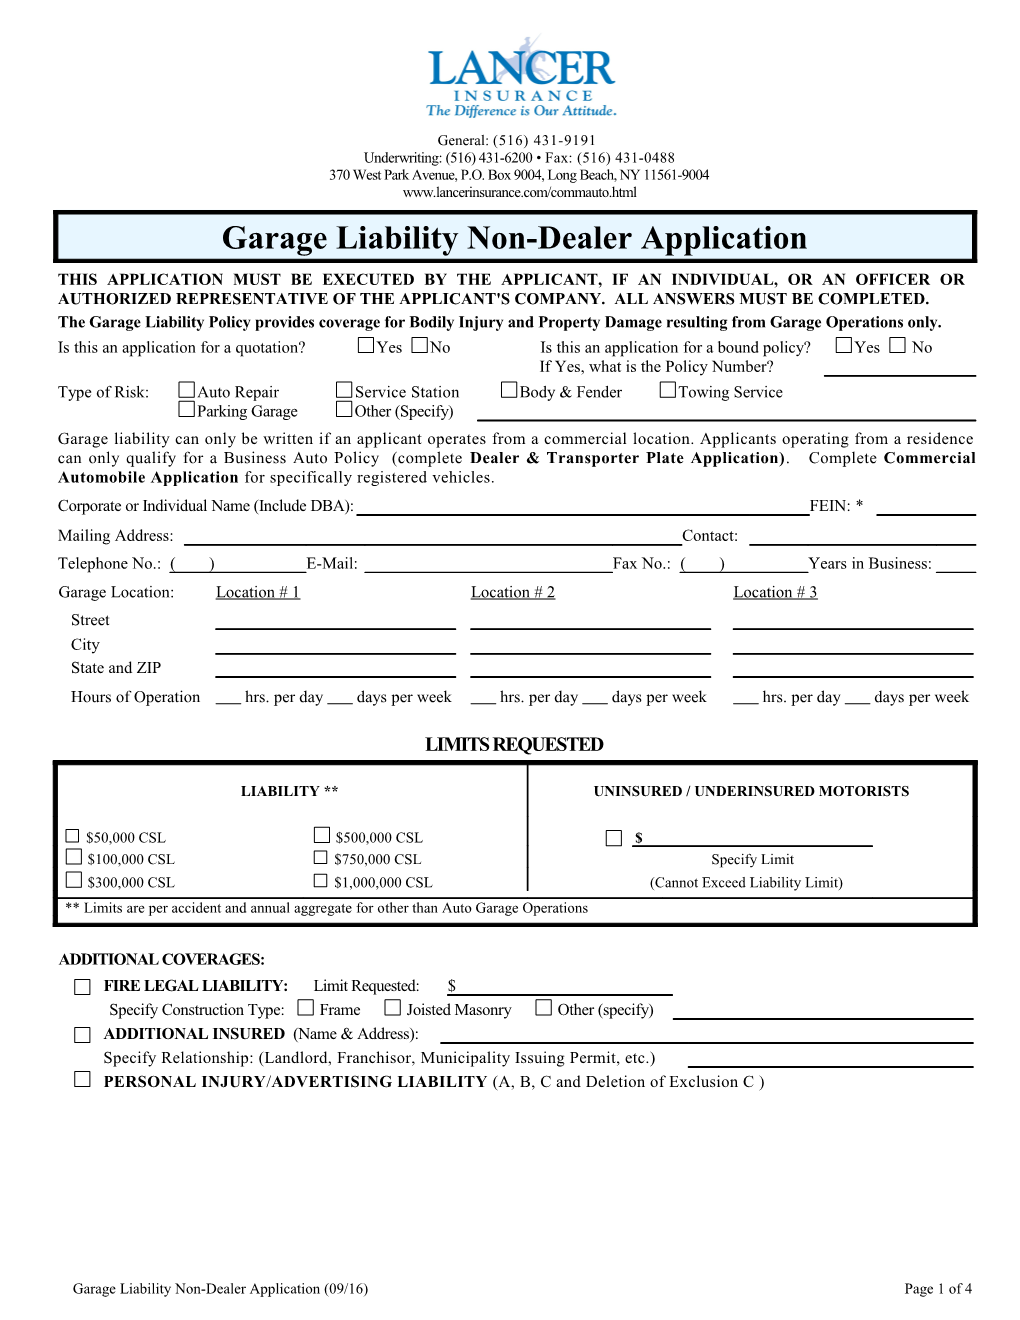 Garage Liability Non-Dealer Application (09/16)Page 1 of 4